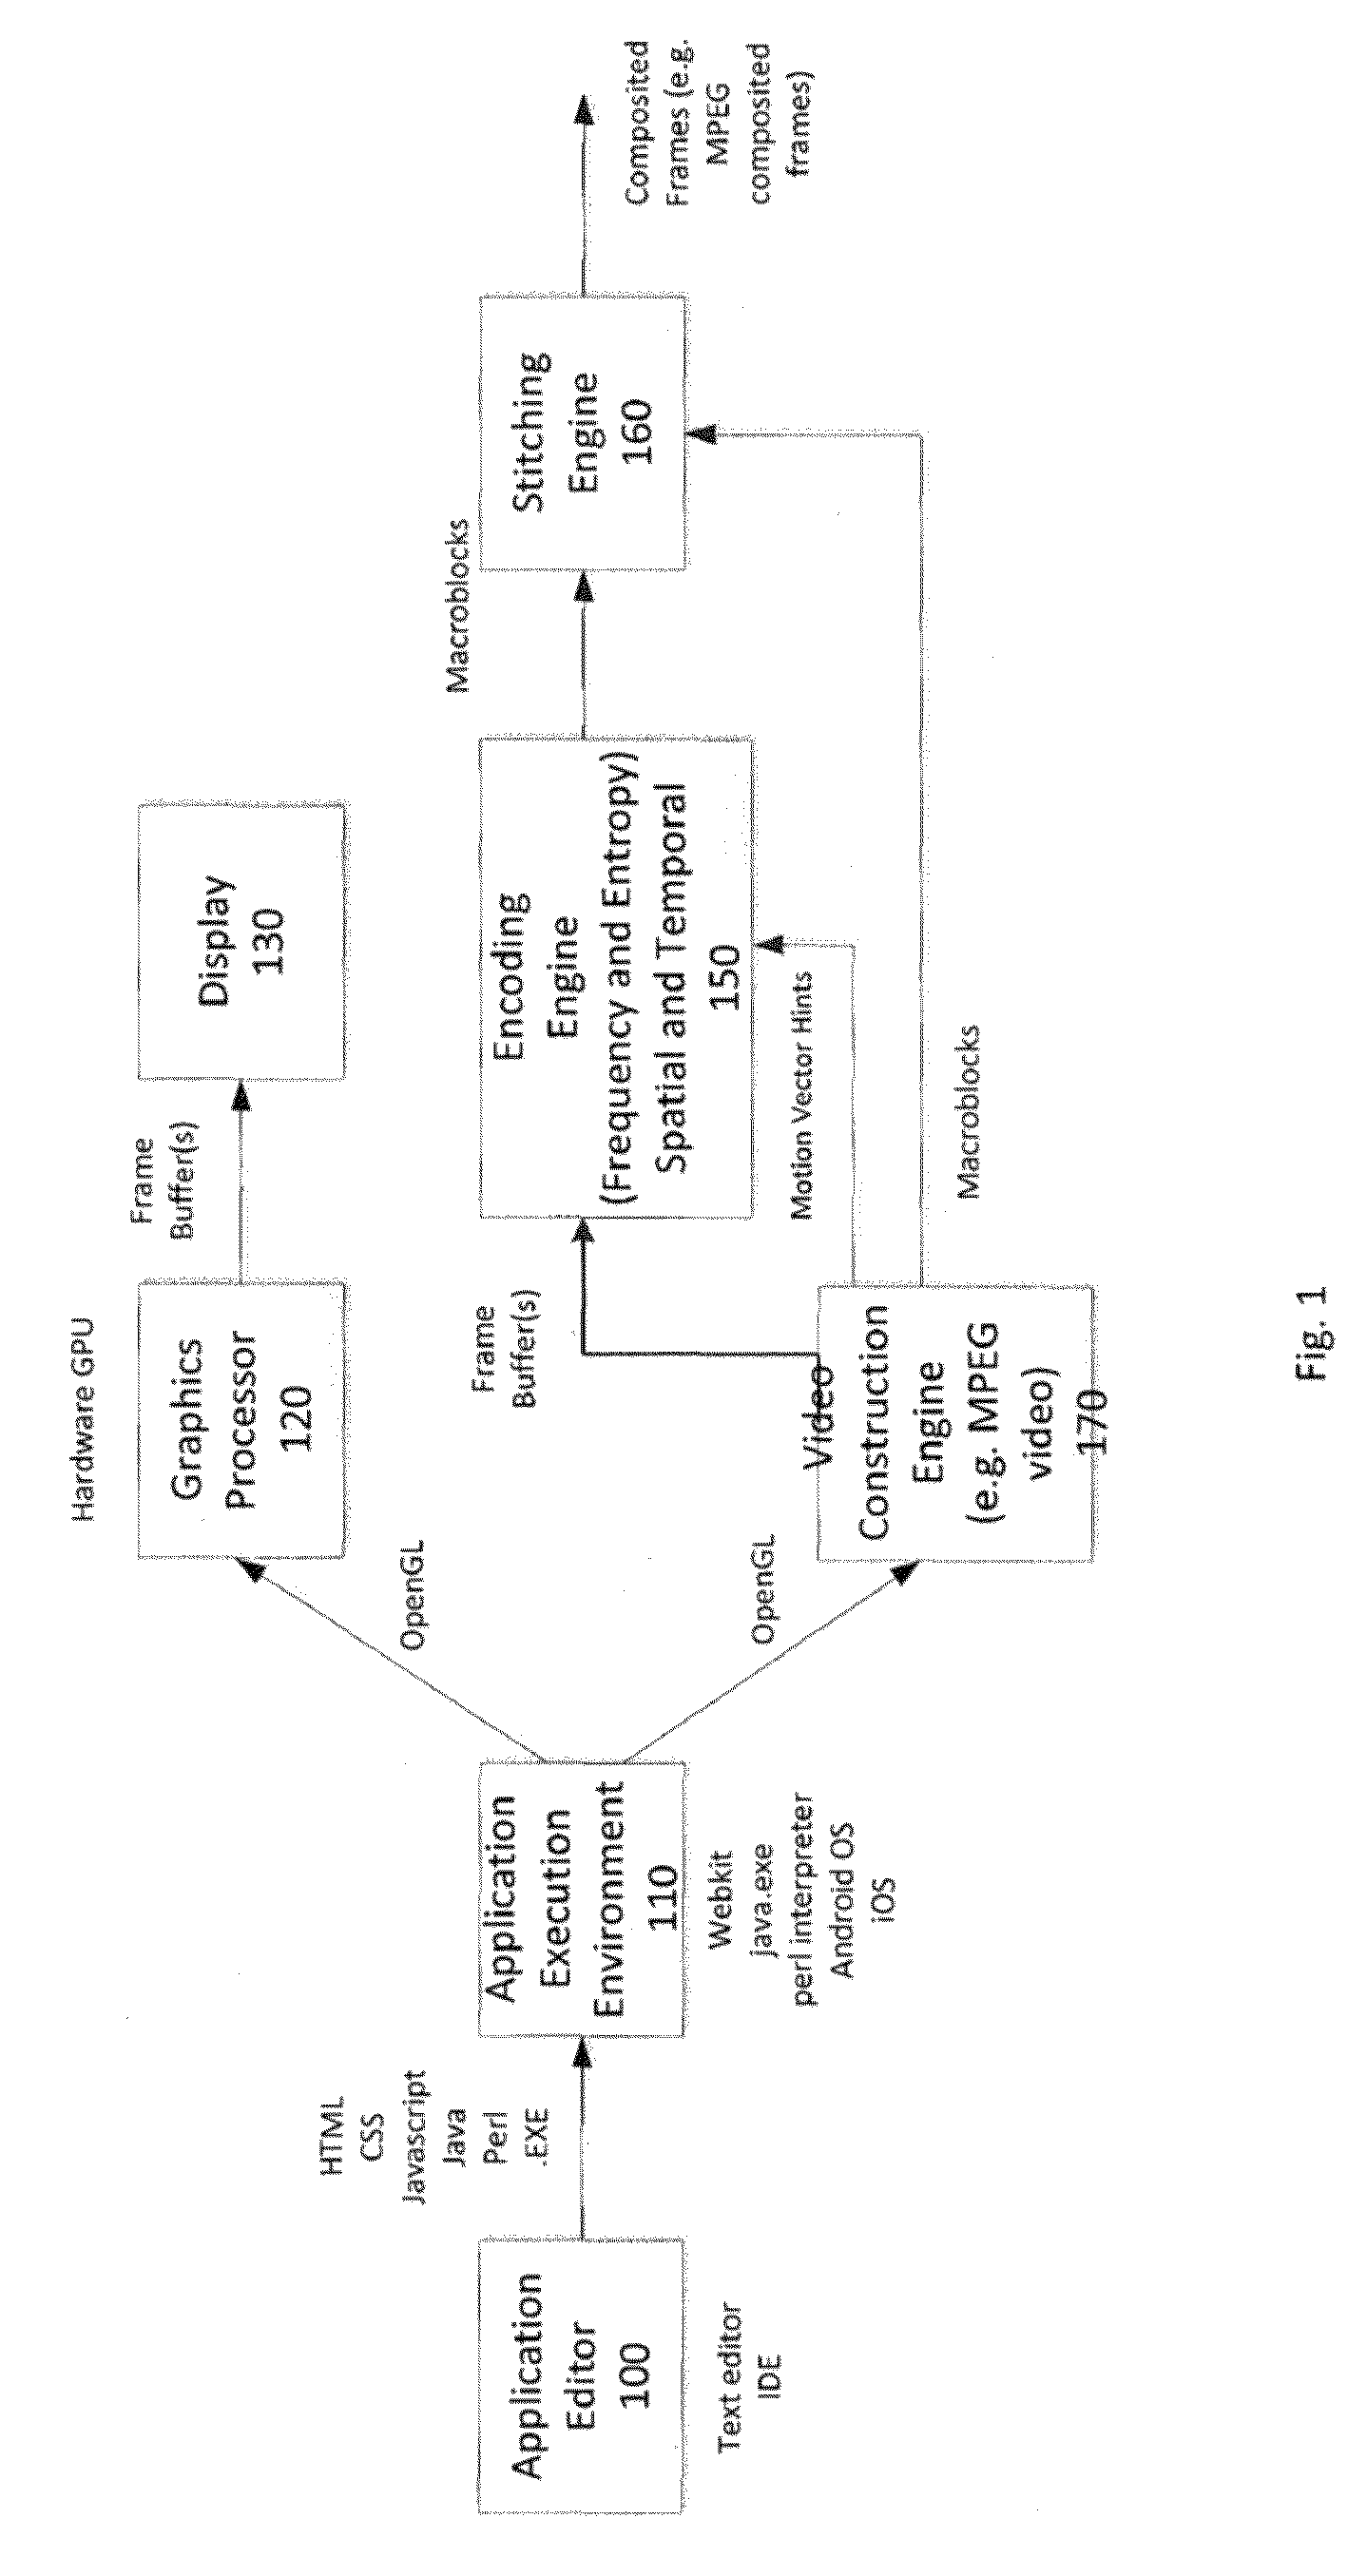 System and method for exploiting scene graph information in construction of an encoded video sequence